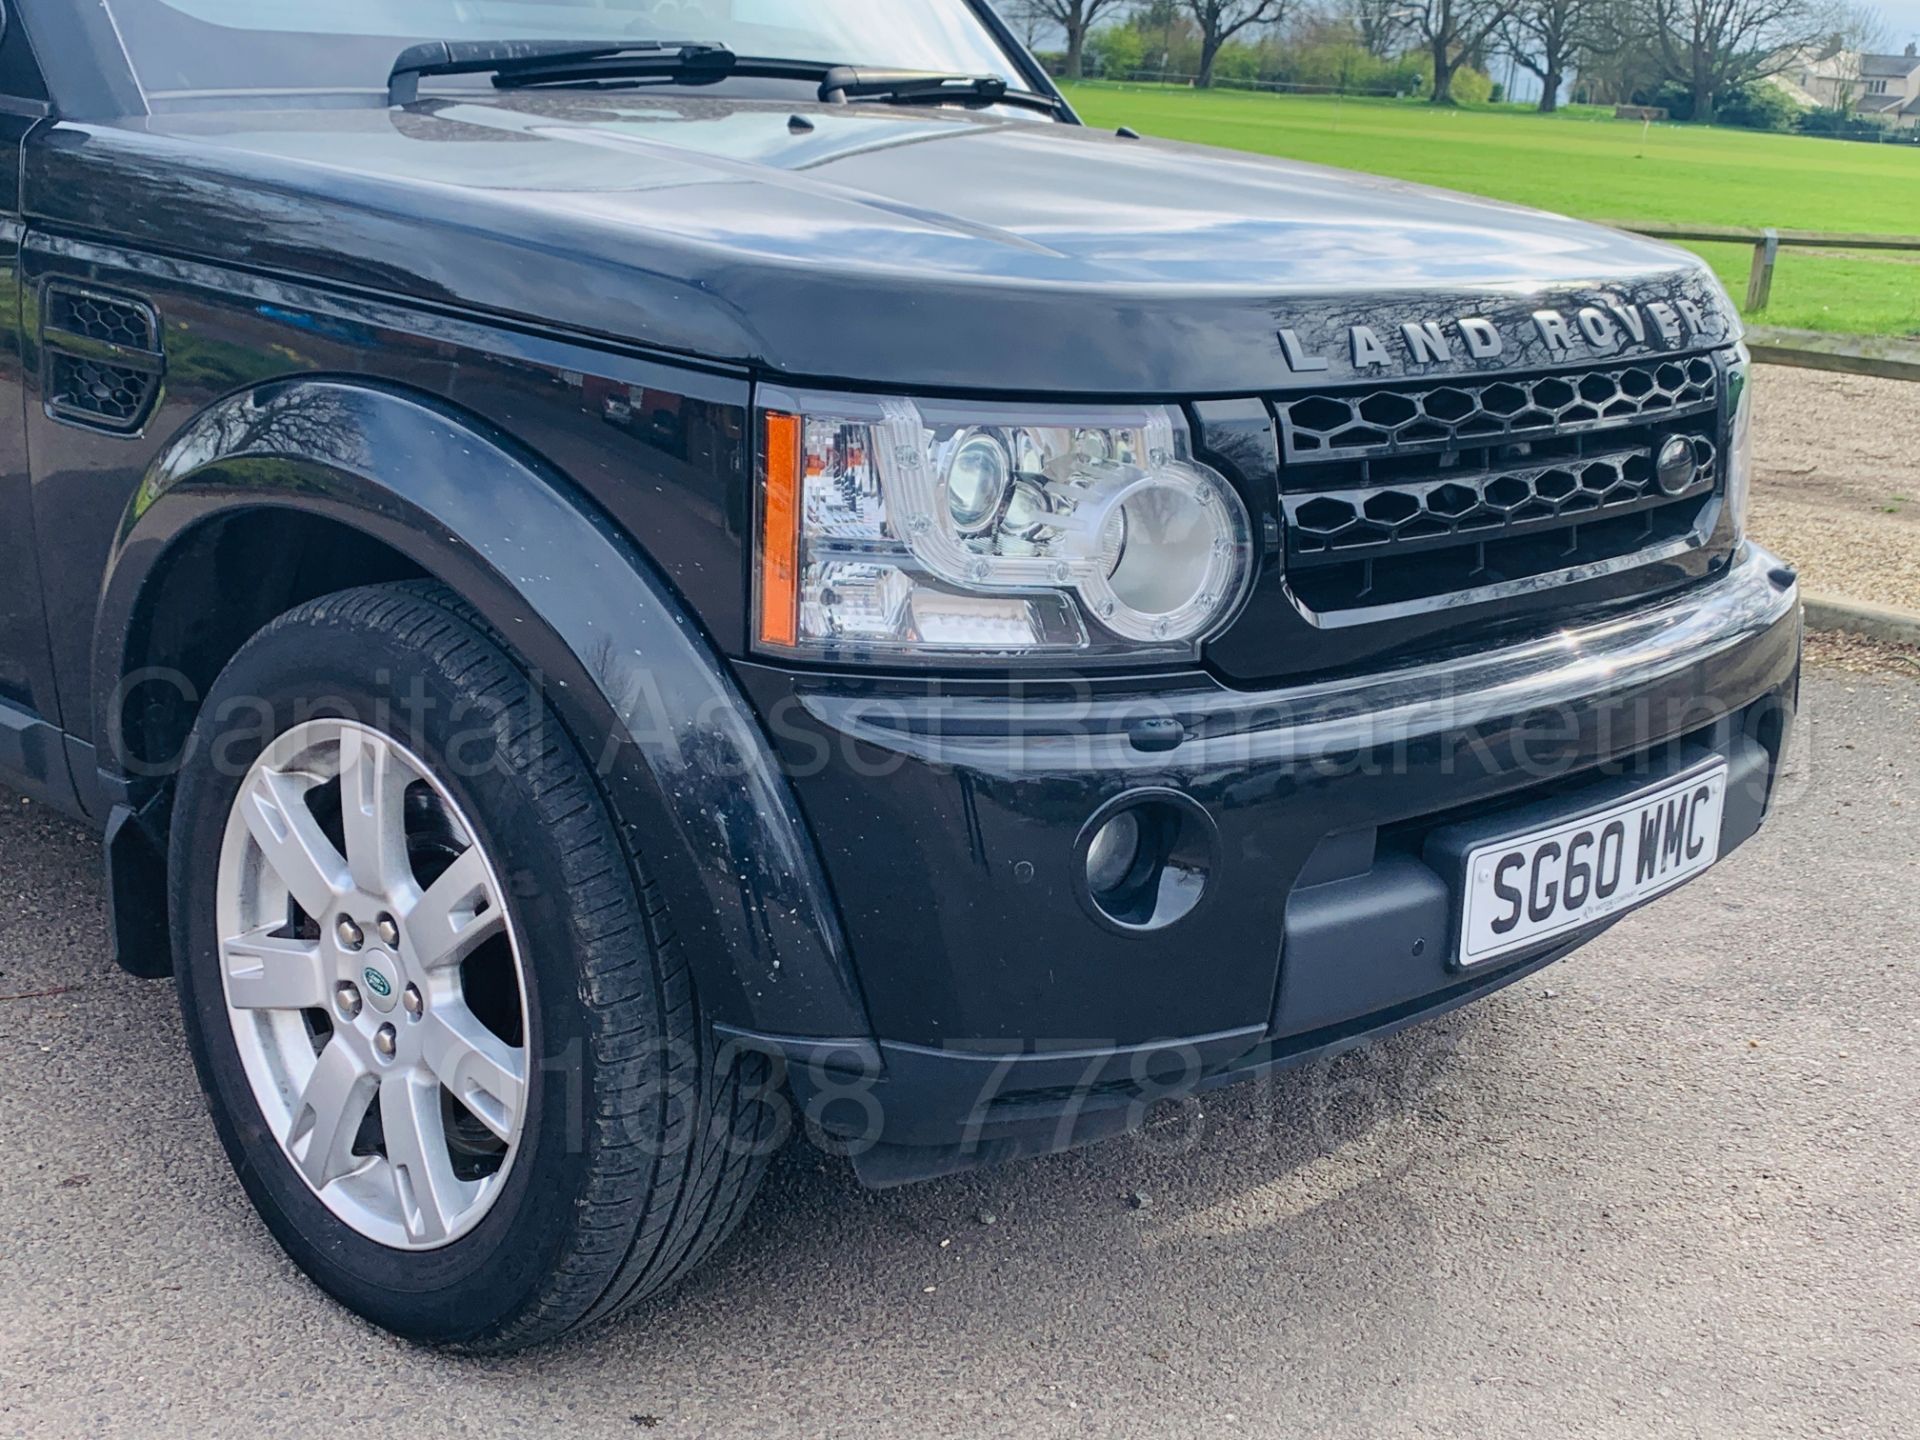 LAND ROVER DISCOVERY 4 **XS EDITION** (2011 MODEL) '3.0 TDV6 - 245 BHP - AUTO' *7 SEATER* (NO VAT) - Image 13 of 55